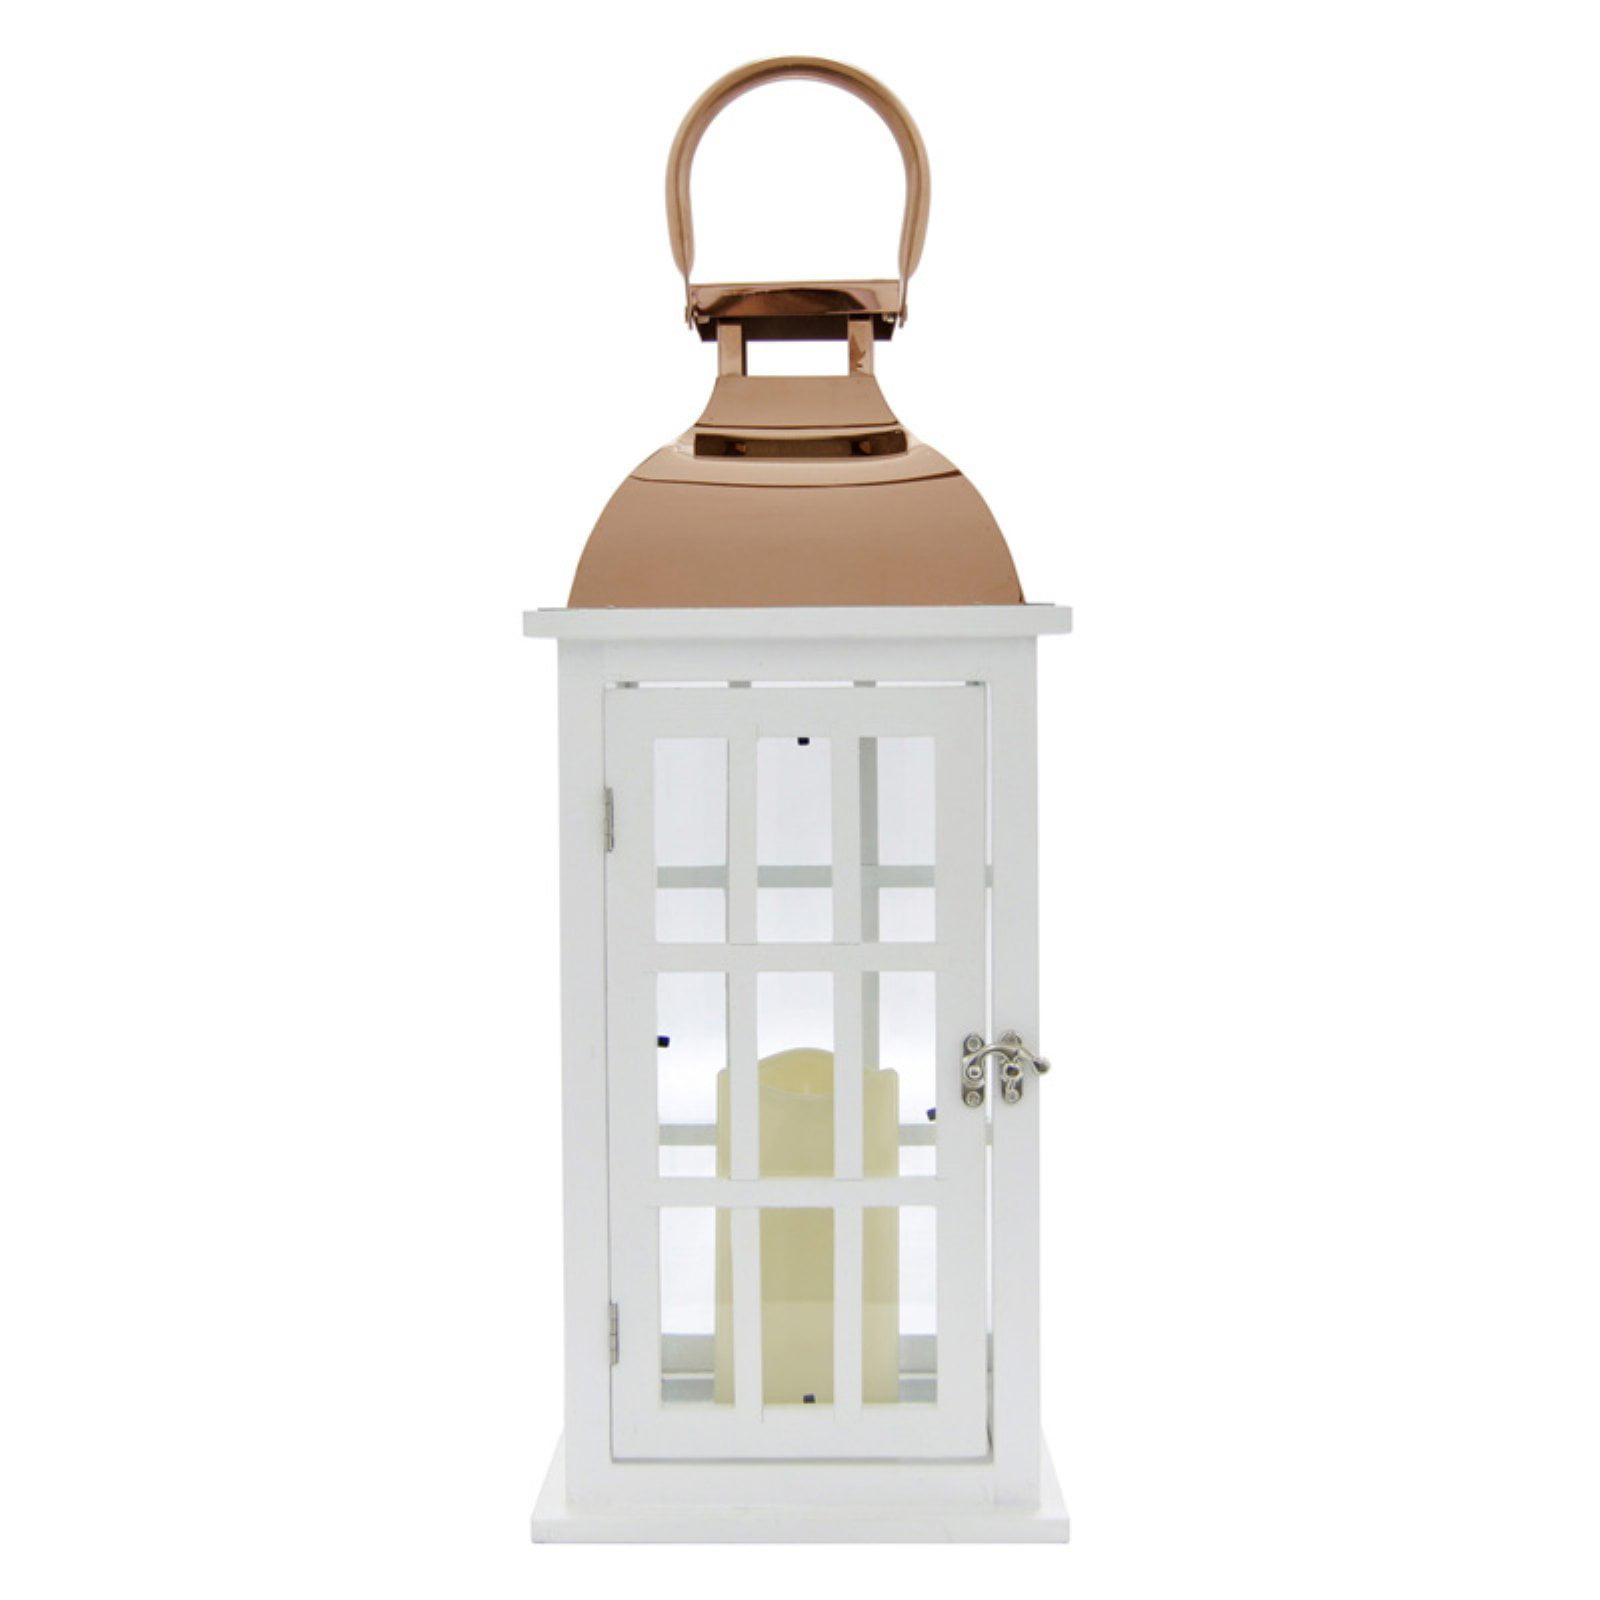 Three Hands Lantern With Led Candle